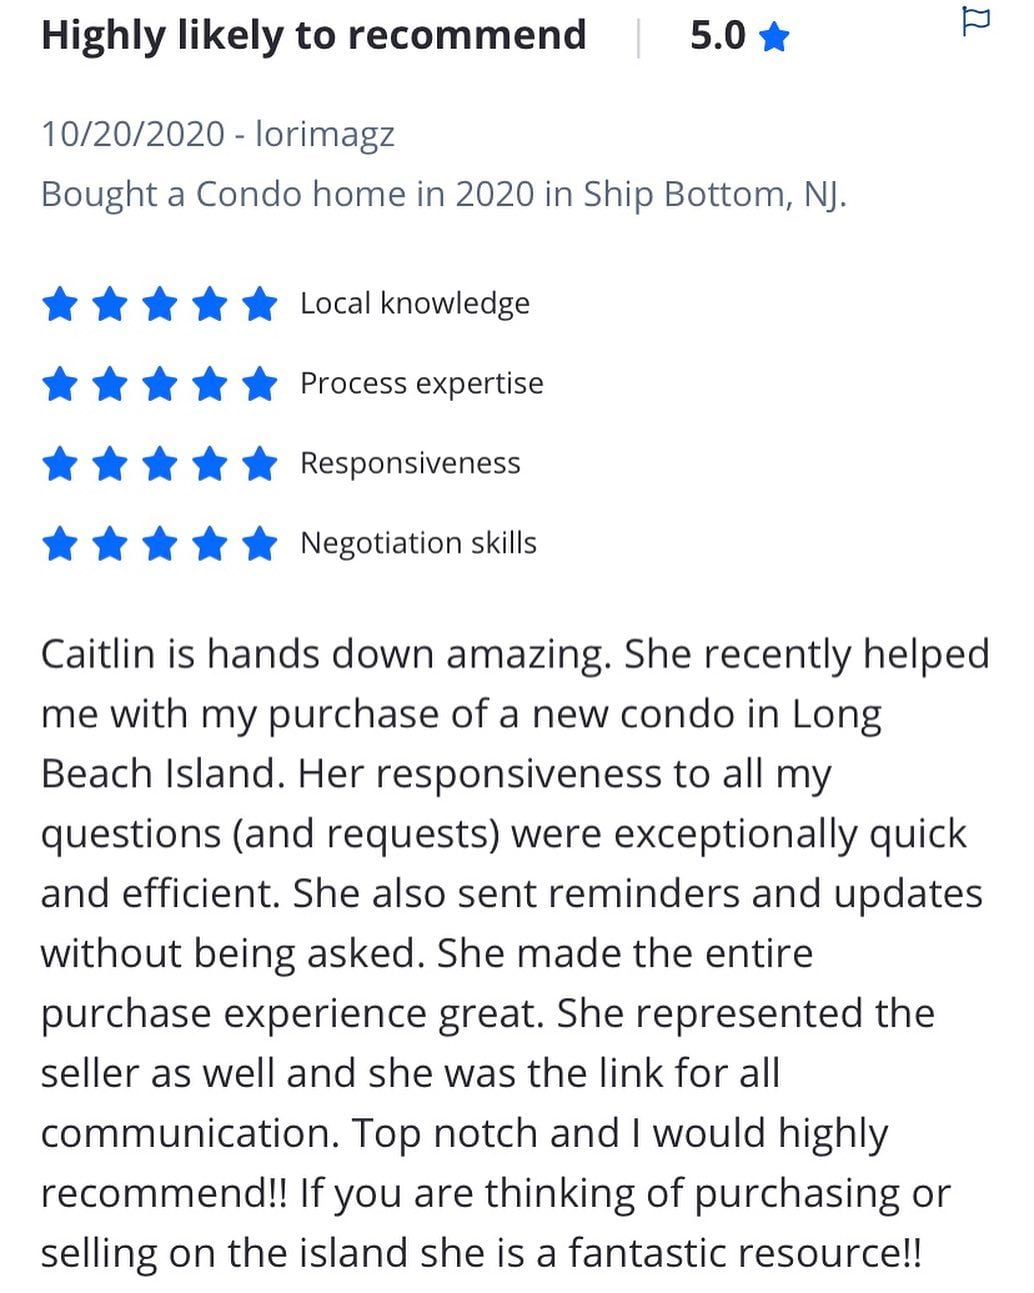 It’s reviews like this that make it all worth it!  Thank you to my buyer for the...